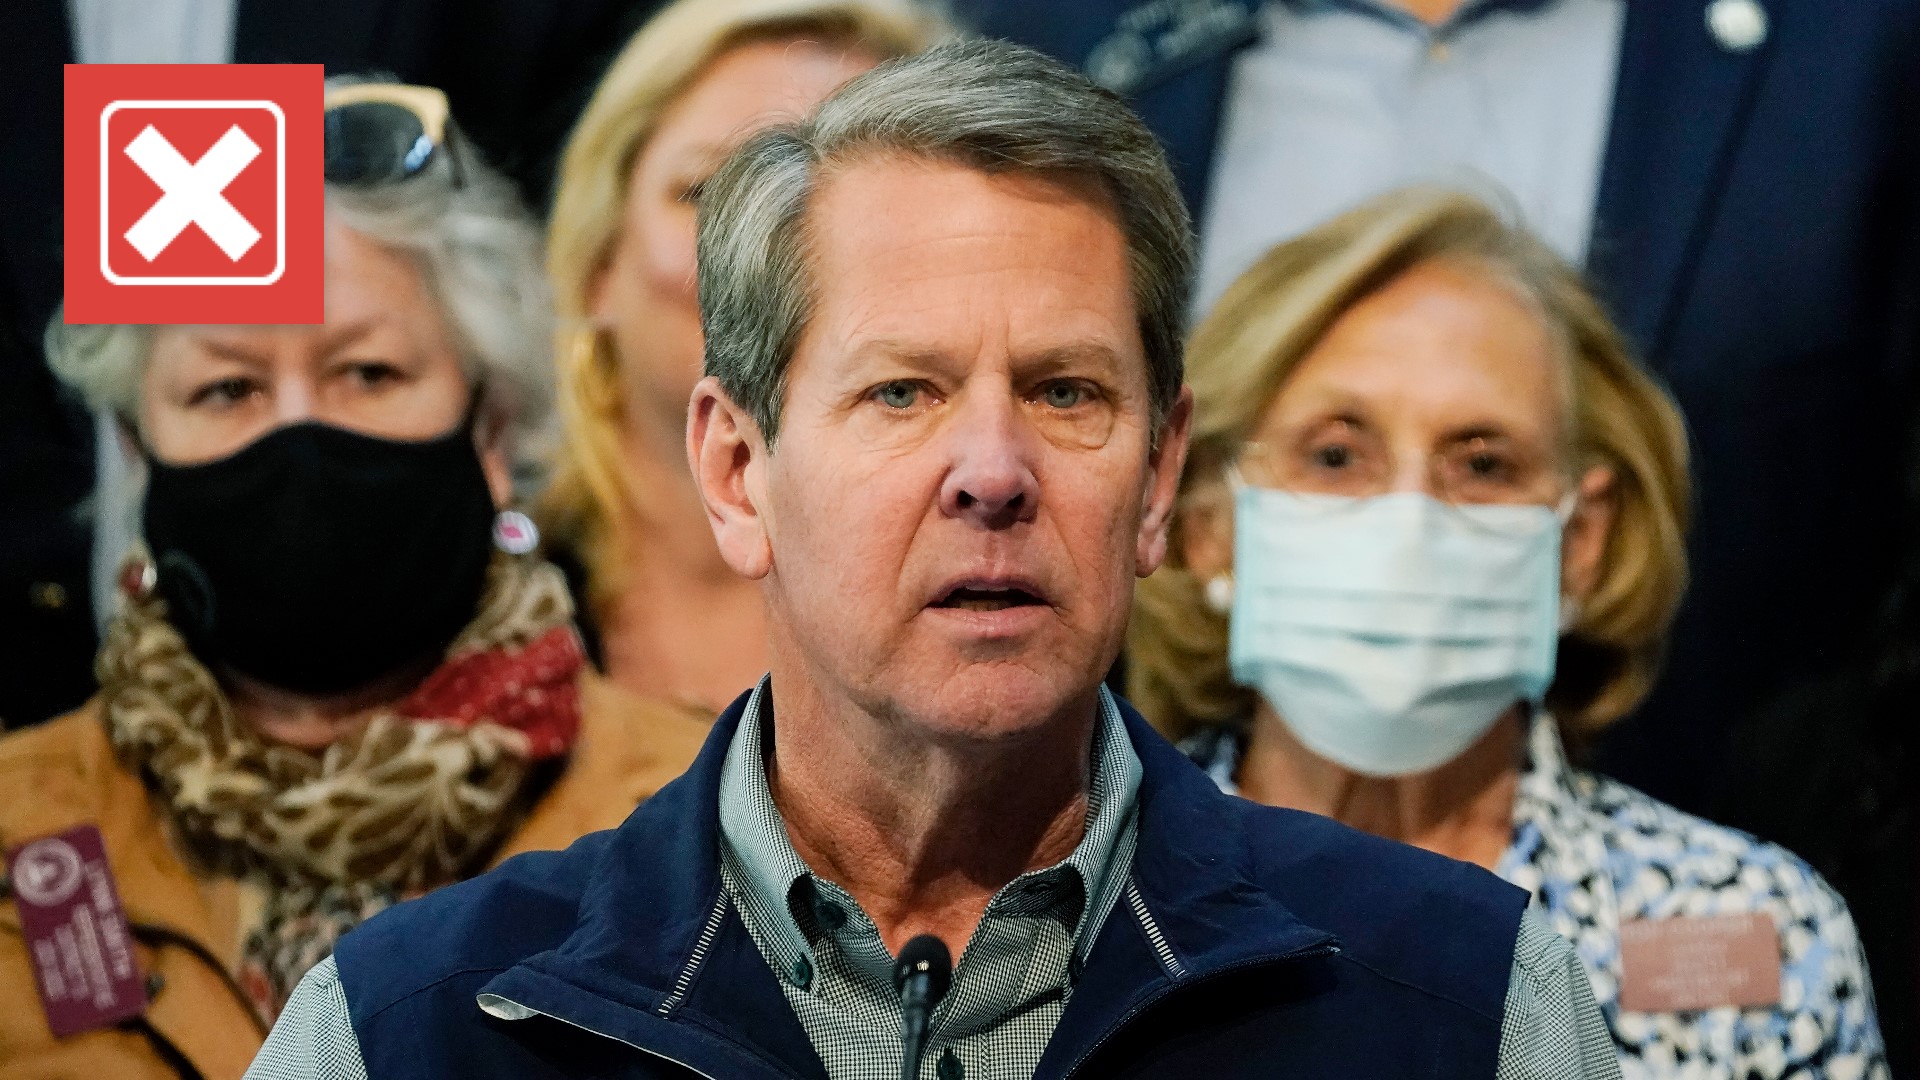 Gov. Kemp first referenced a failed AIDS vaccine mandate in September of 2020. He has since made similar comments twice in the past month.